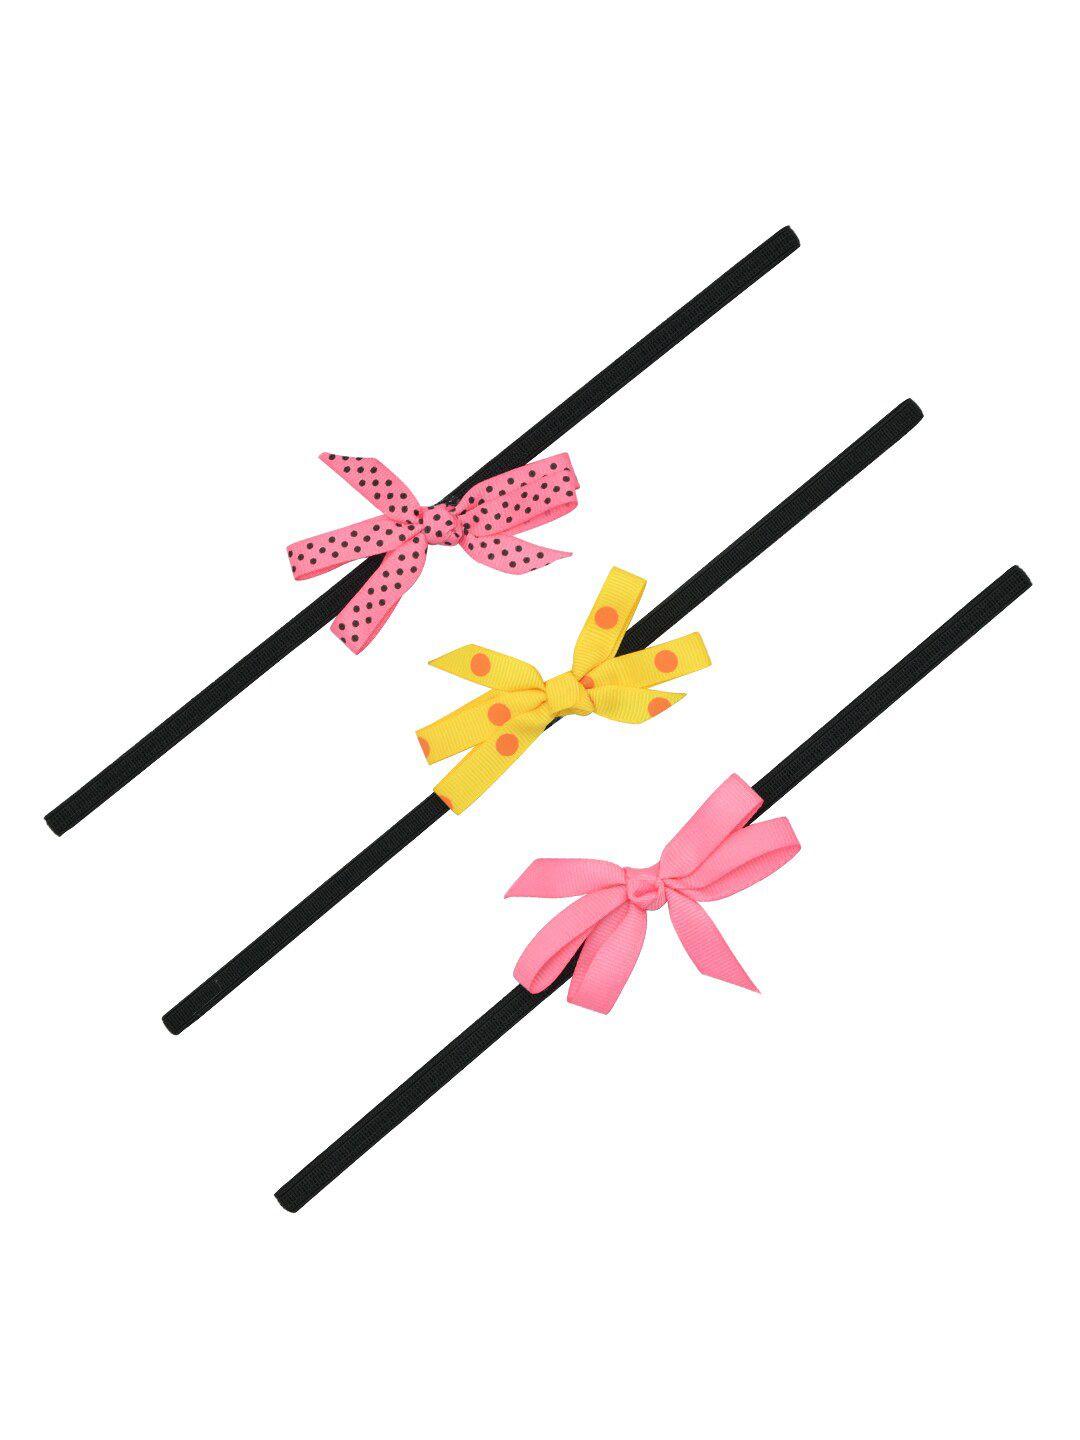 funkrafts girls black & pink set of 3 fabric hairbands with bow detail